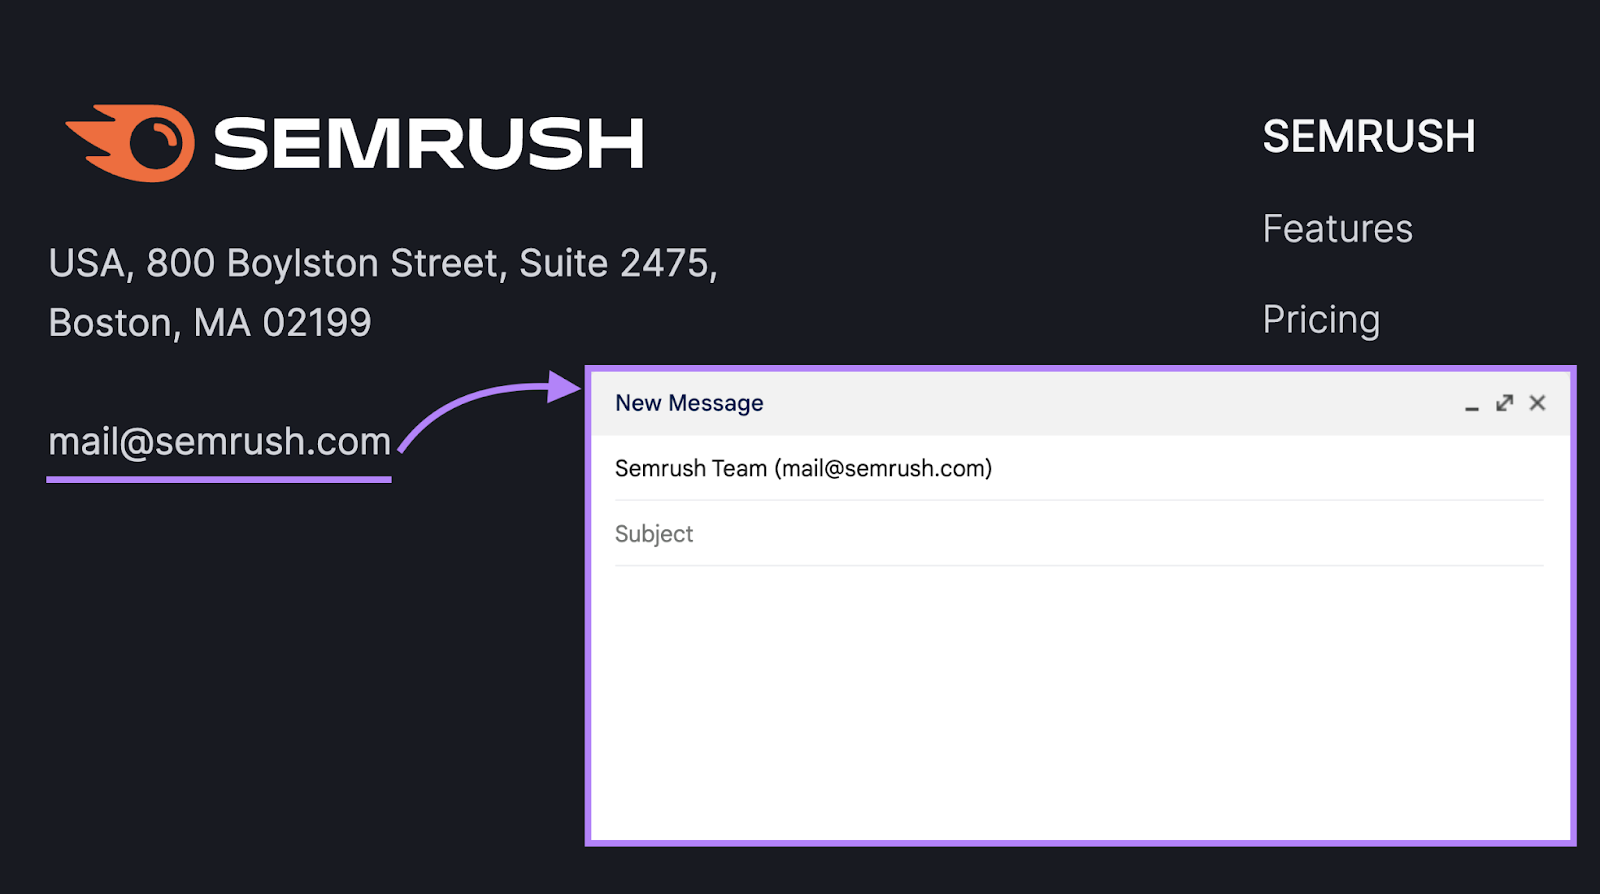 Clicking on "mail@semrush.com" creates an email draft